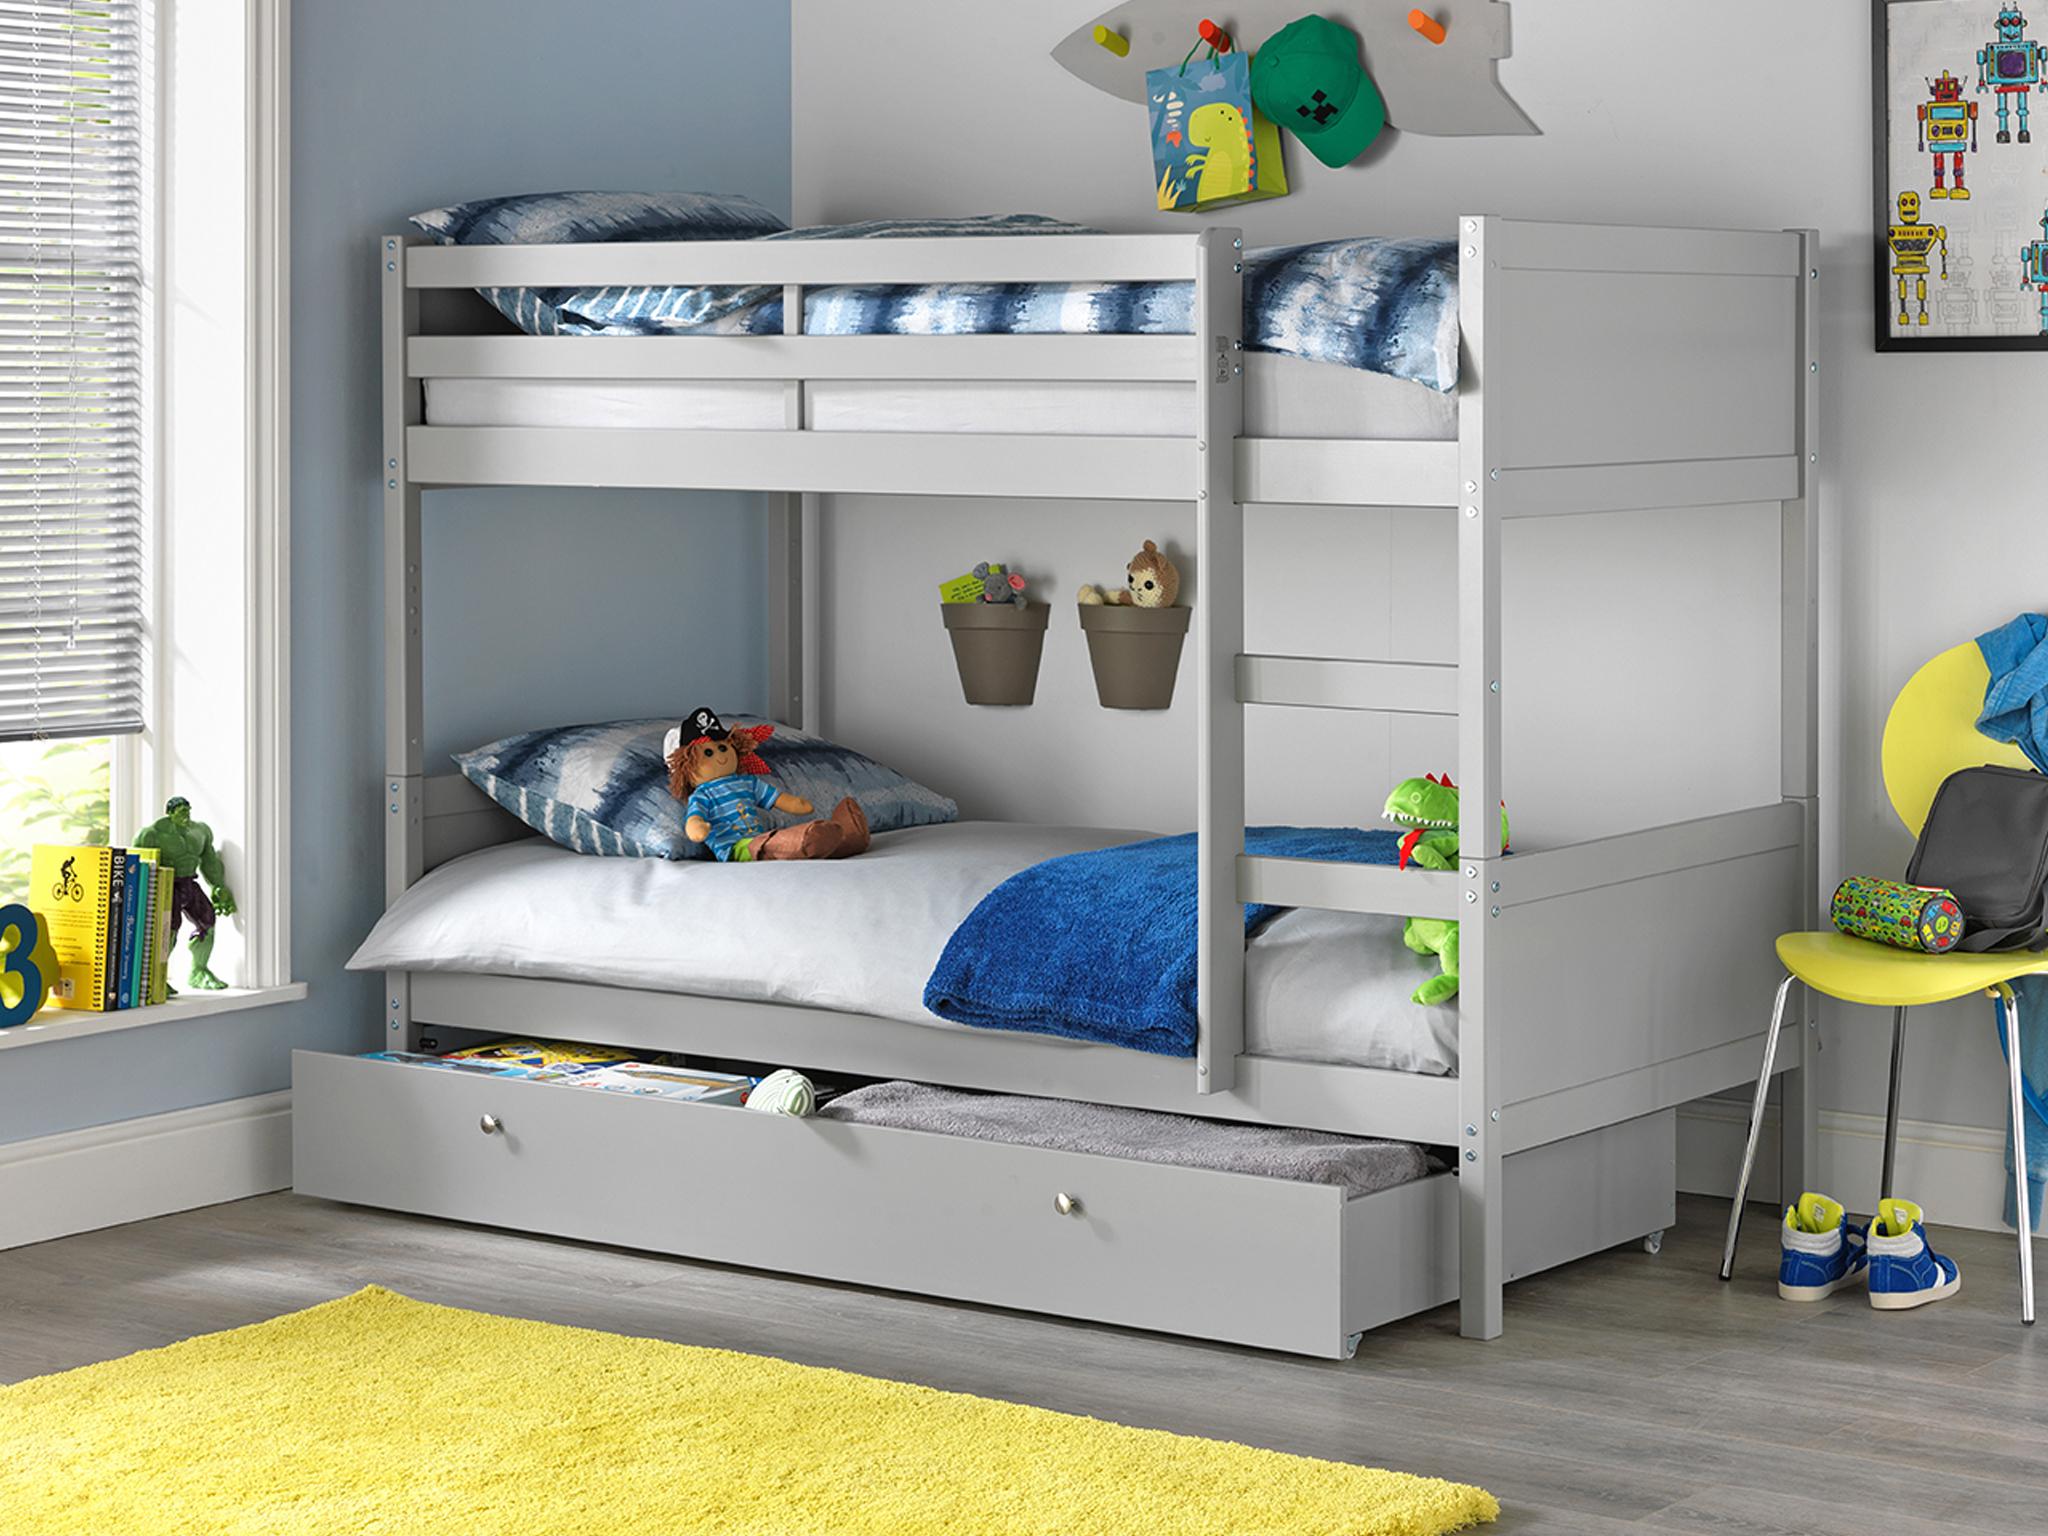 bunk beds that go into single beds